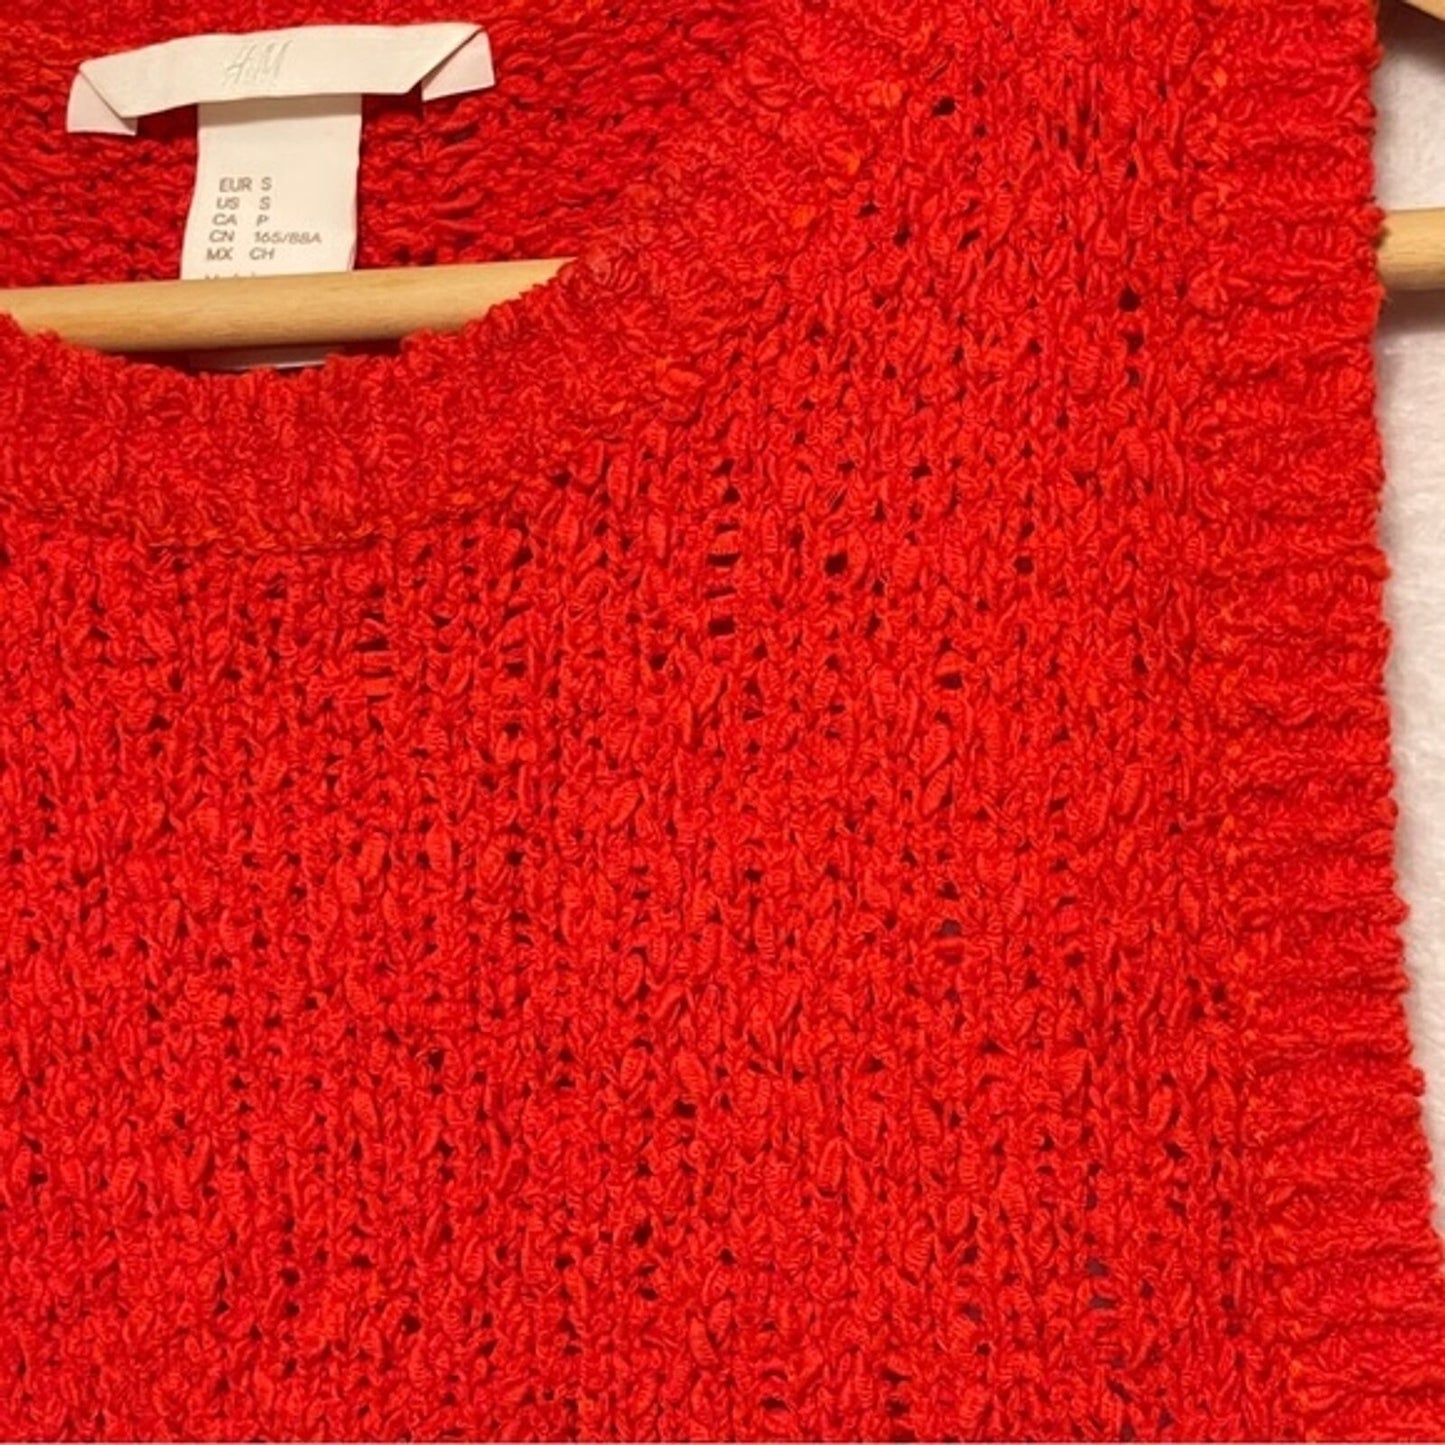 H&M Oversized Red Sweater Knit, Racer Back Tank Size Small Top